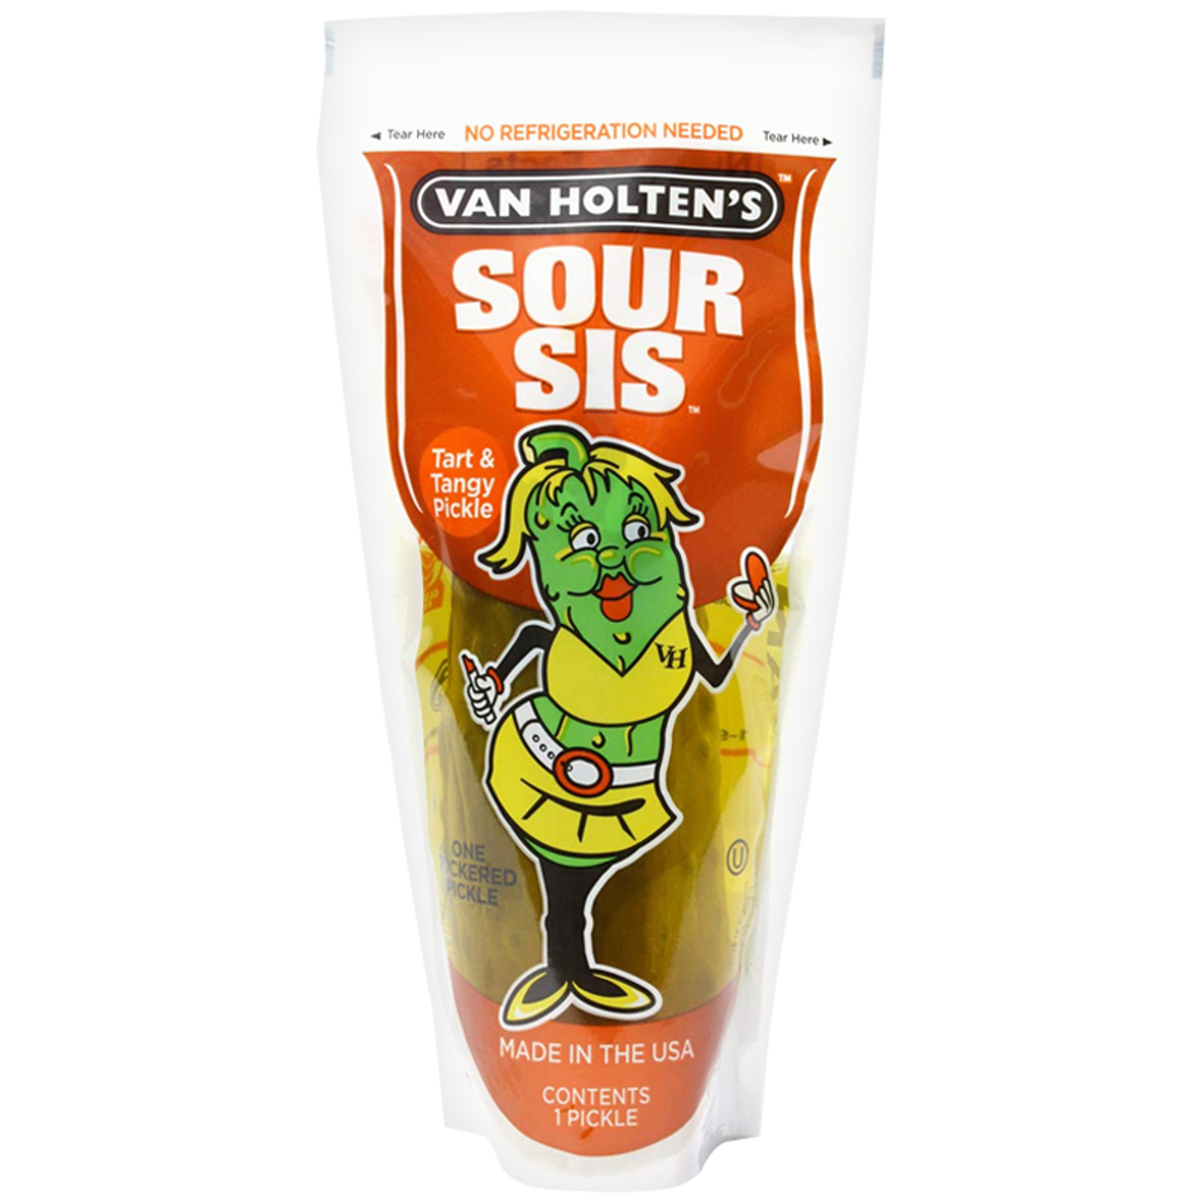 Van Holten's Sour Sis Tart & Tangy Pickle 1 pc